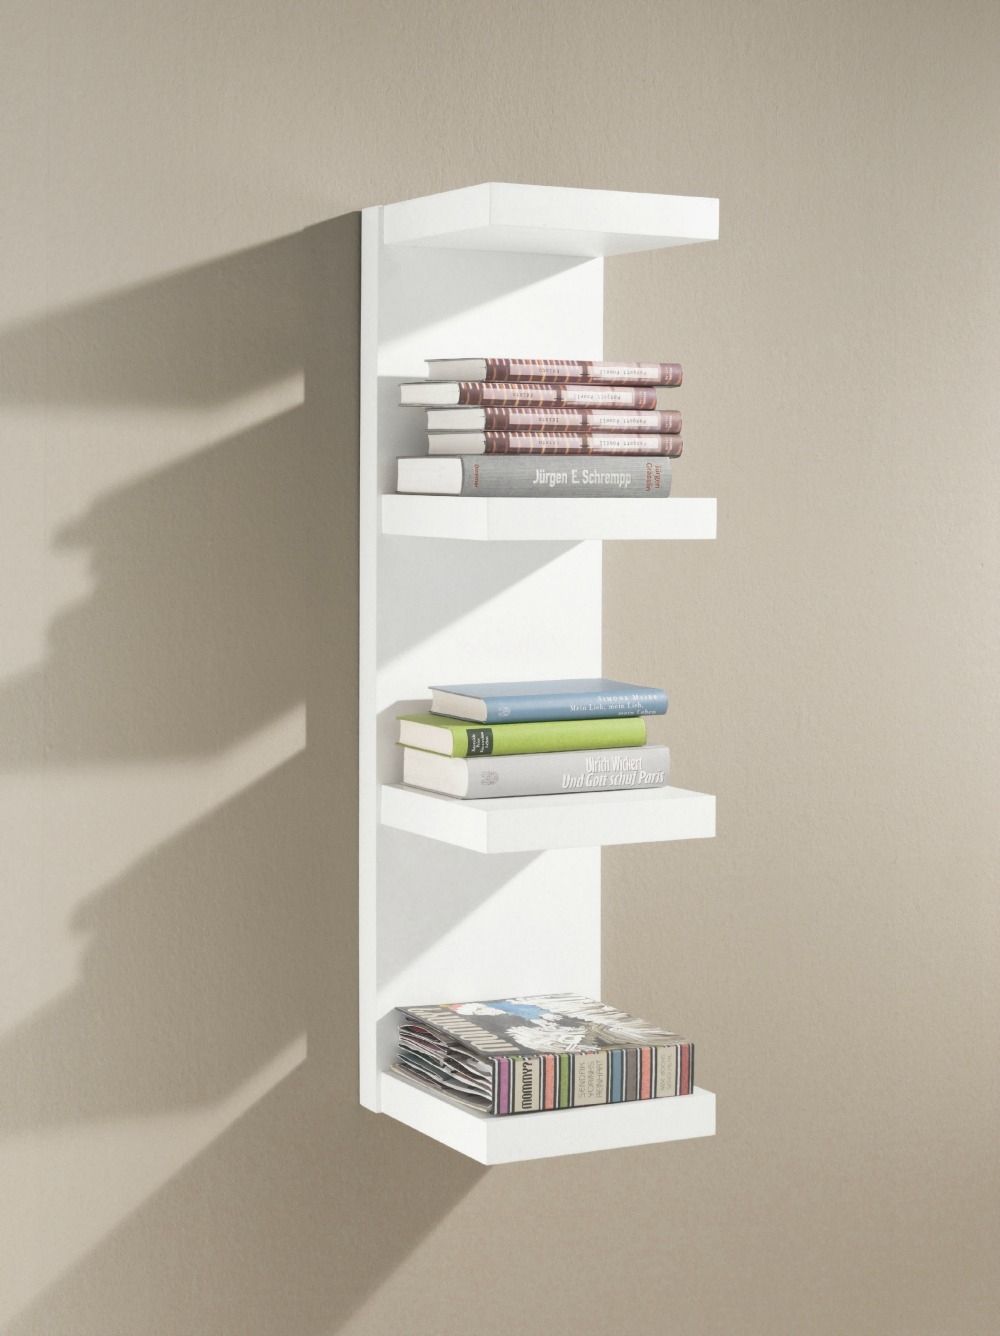 Floating Shelves Floating Wall Shelves In Great Variety Of Sizes Regarding Floating Wall Shelves (View 4 of 15)